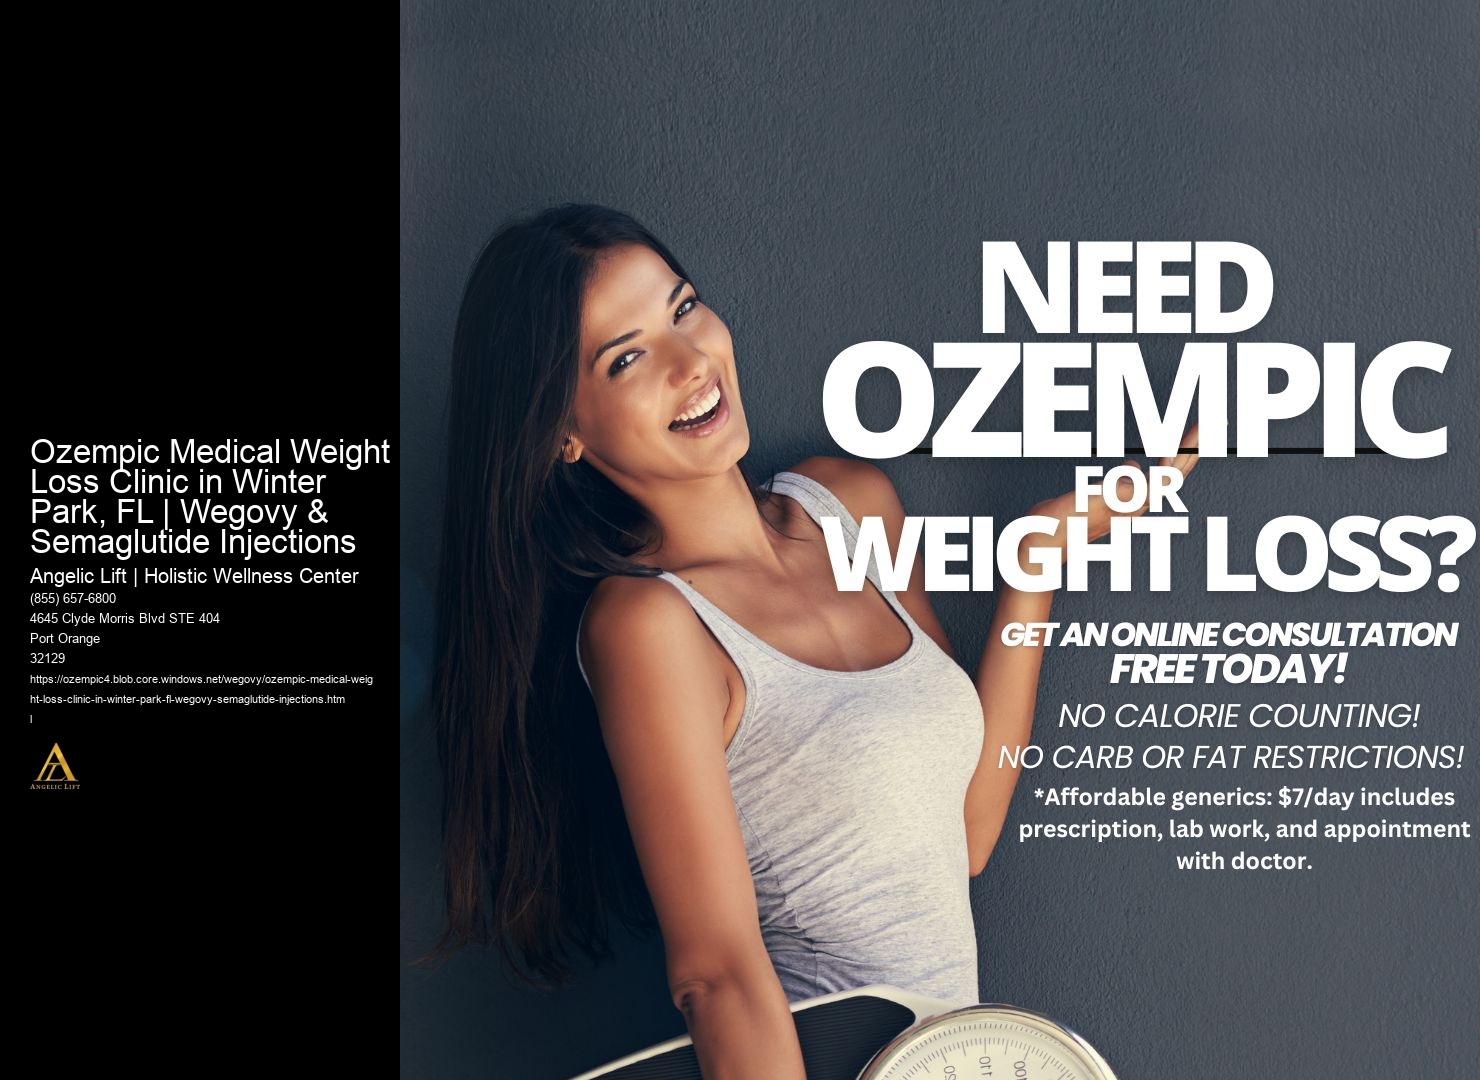 Ozempic Medical Weight Loss Clinic in Winter Park, FL | Wegovy & Semaglutide Injections